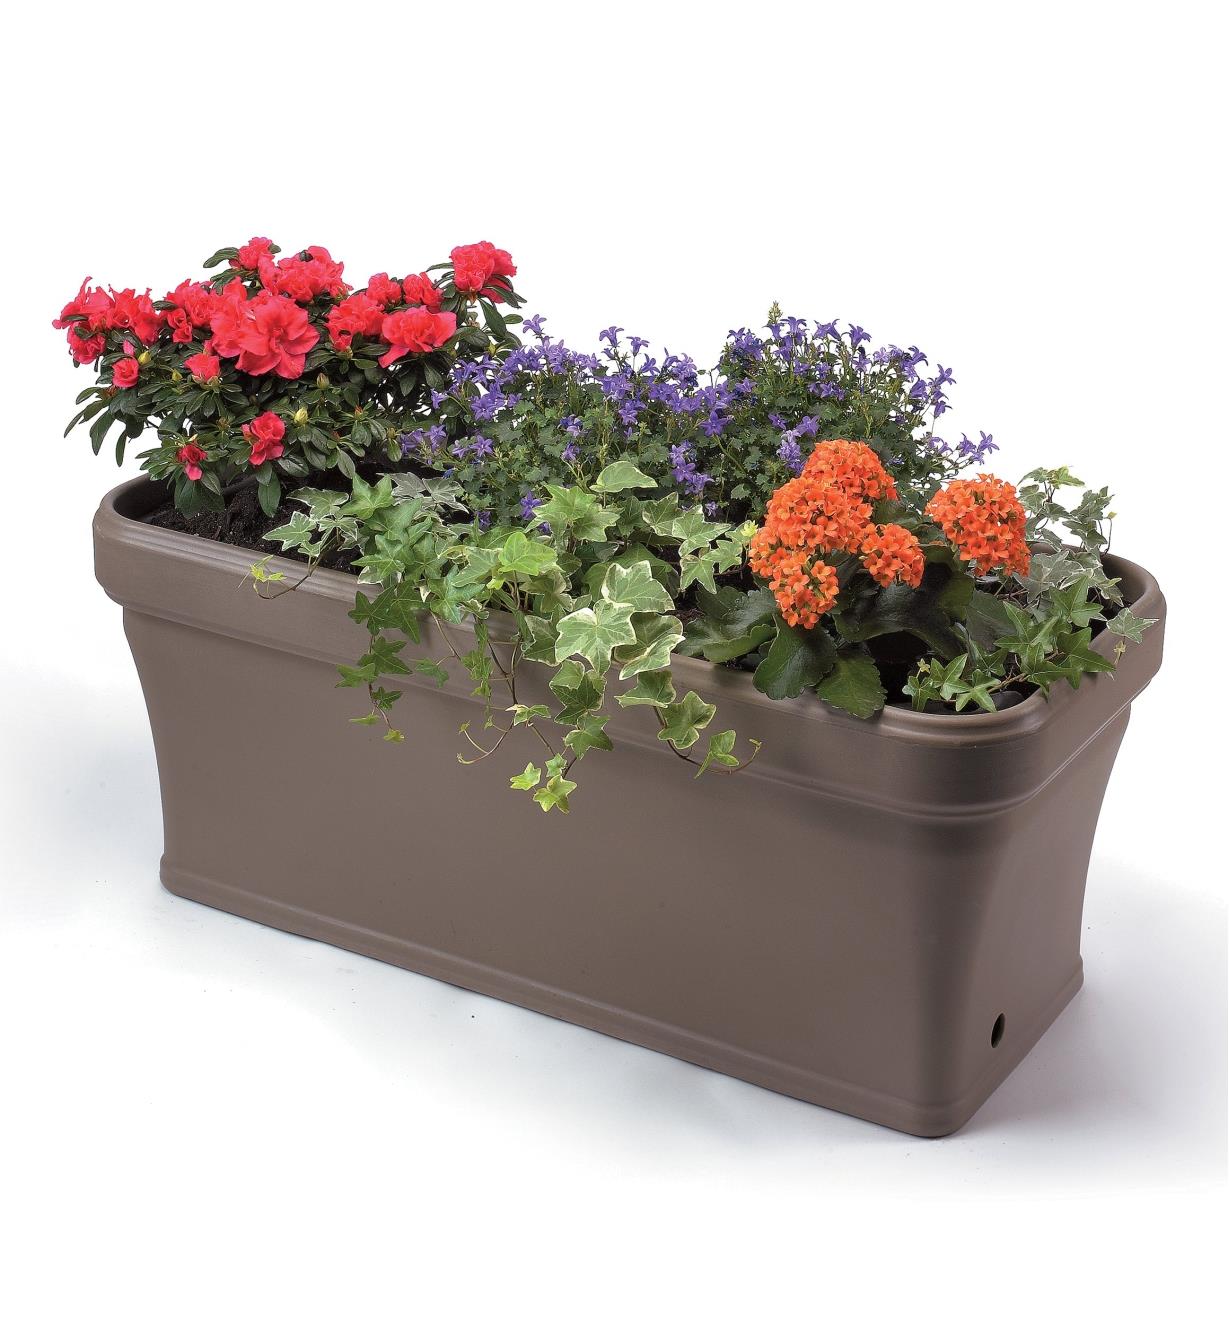 A variety of flowers growing in the Self-Watering Planter